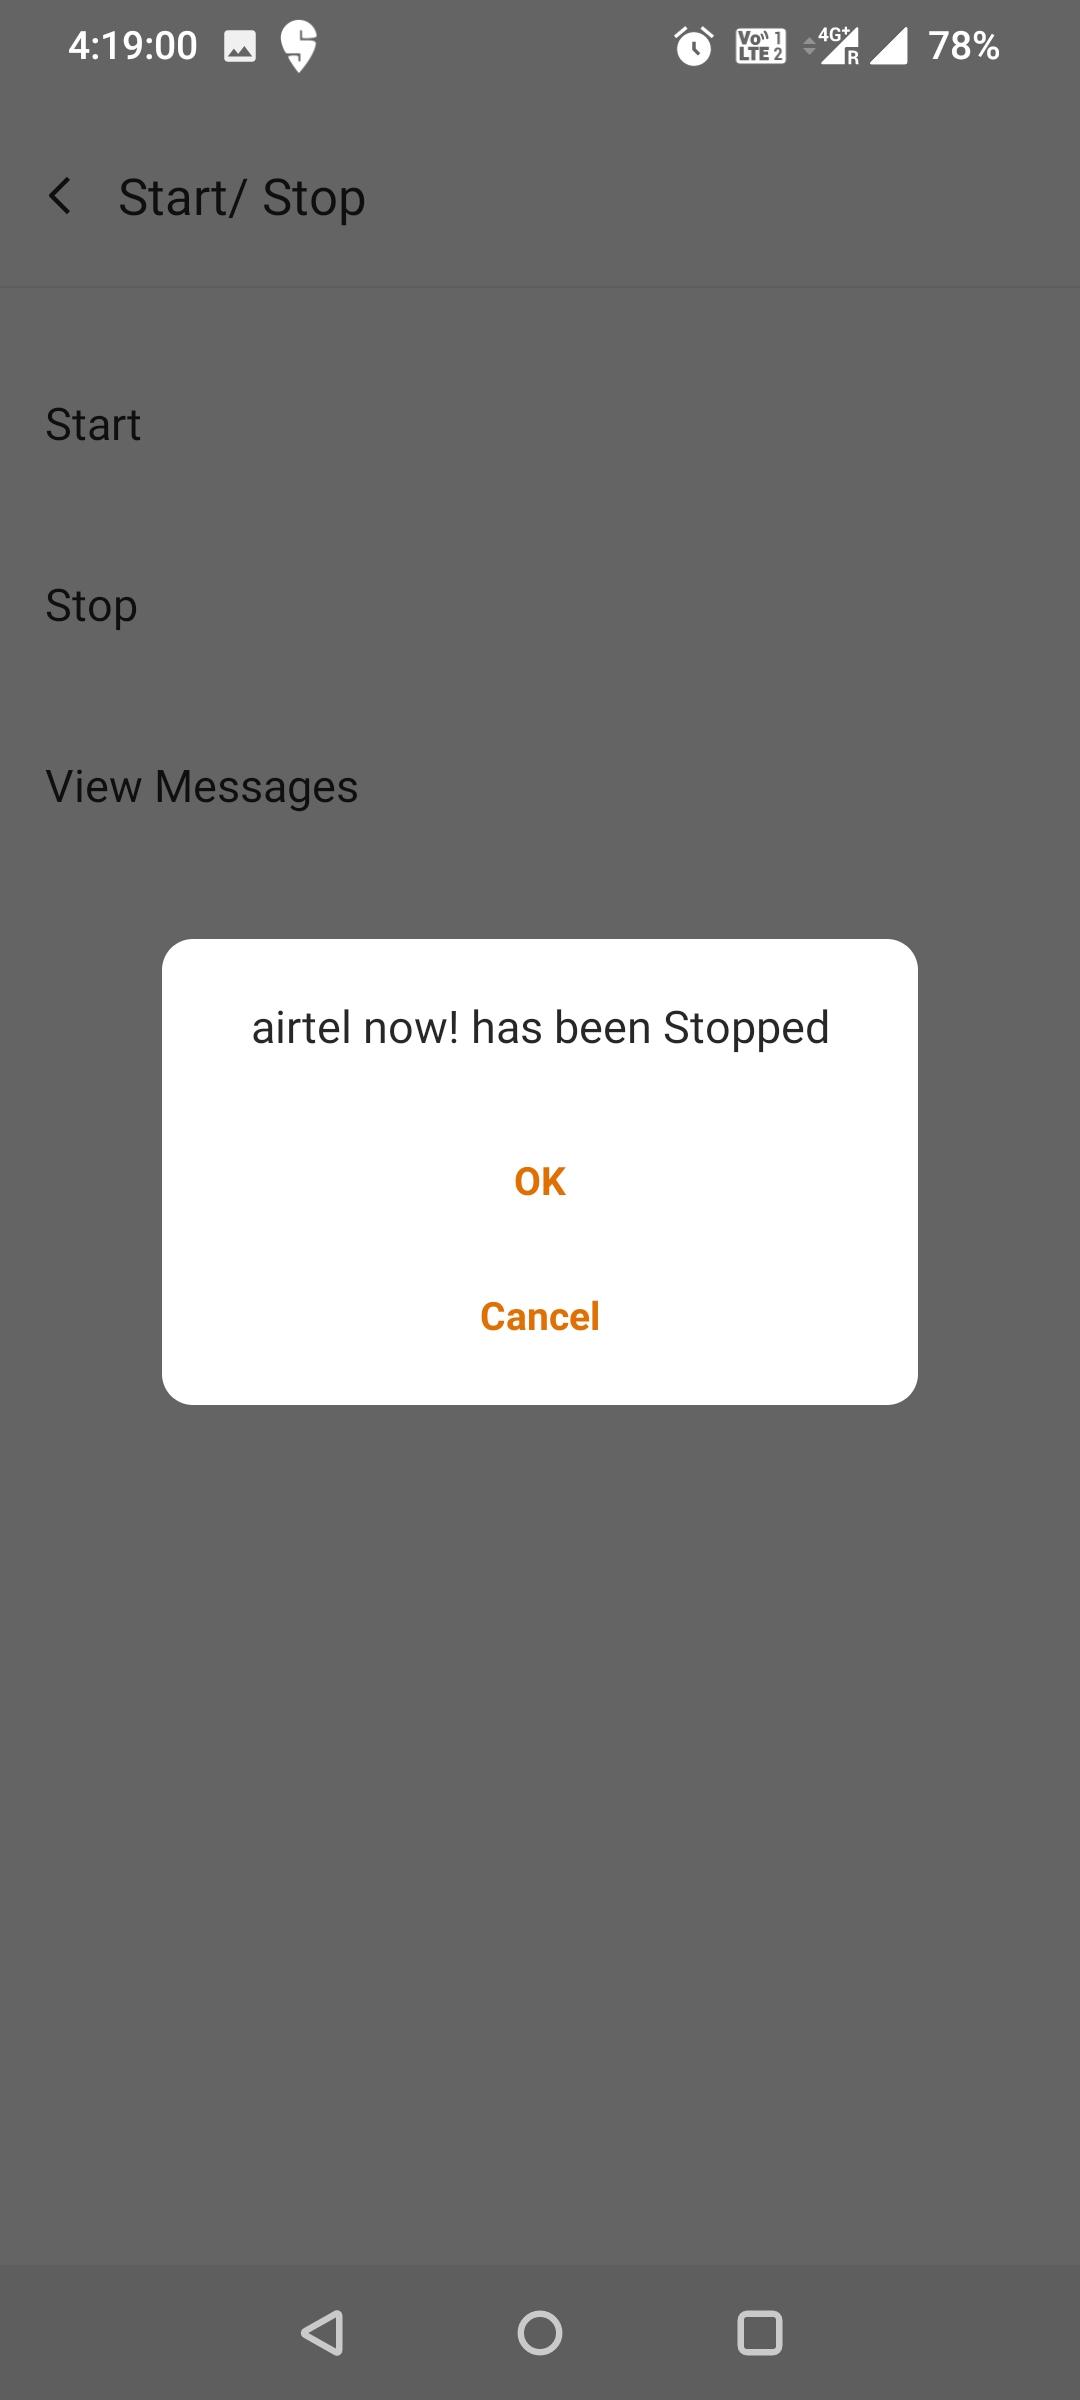 Tap OK airtel now has been stopped